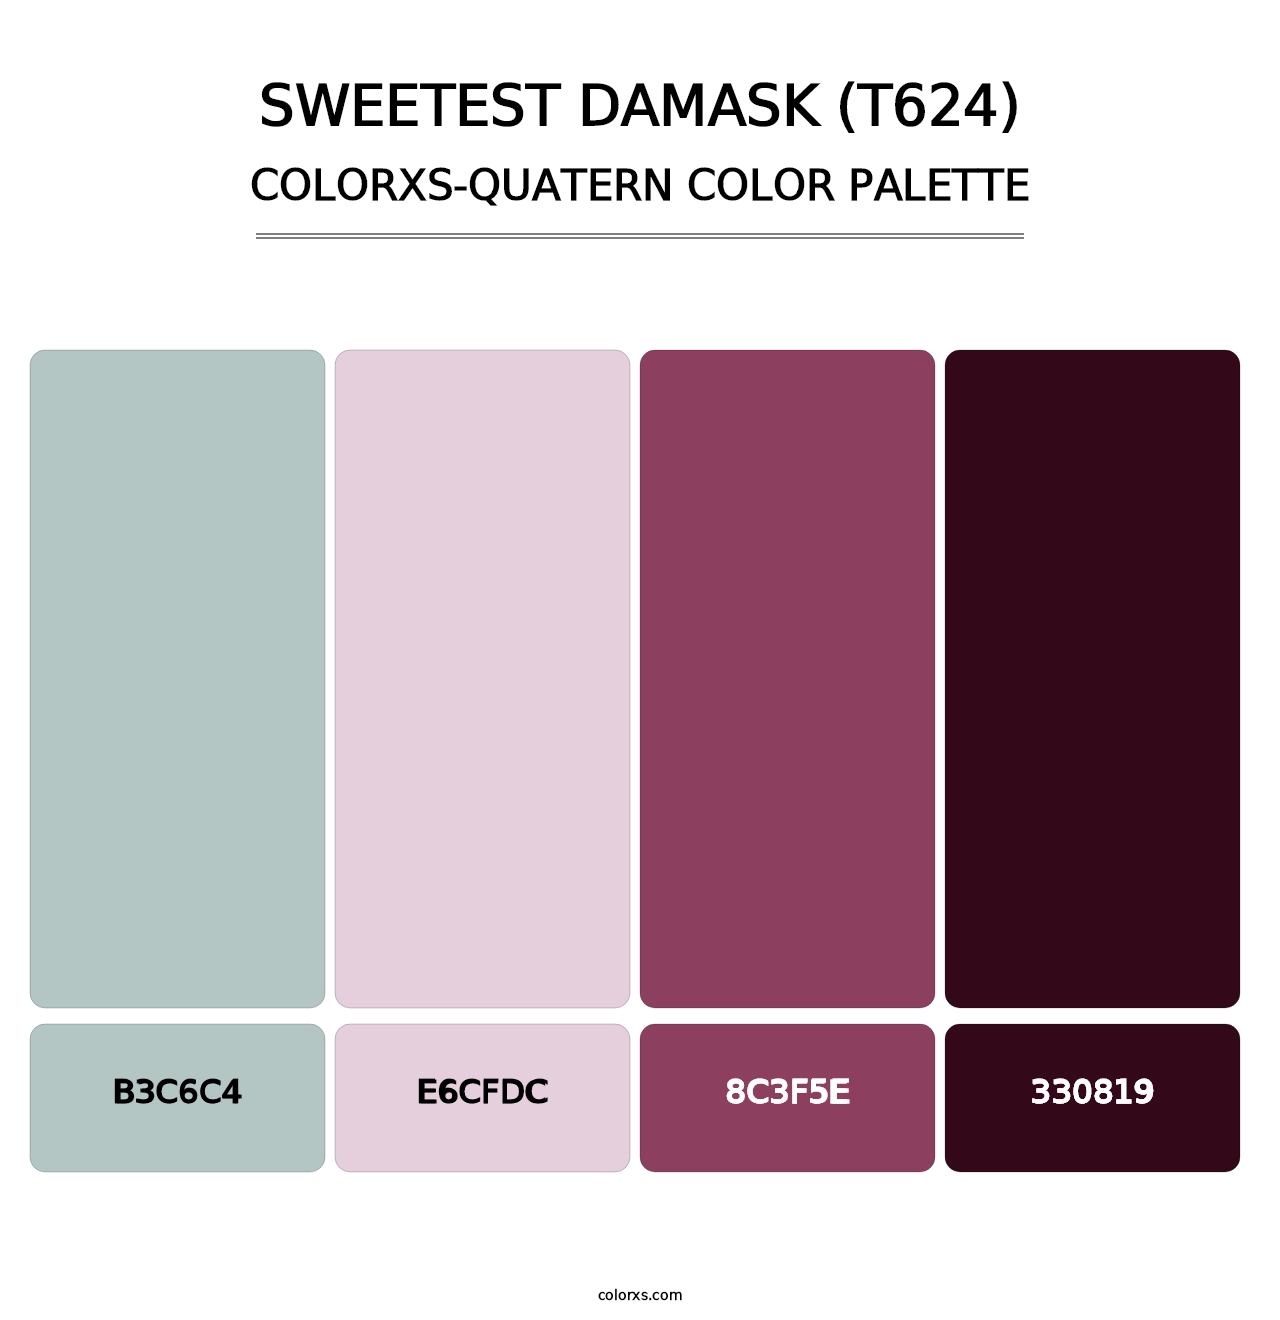 Sweetest Damask (T624) - Colorxs Quatern Palette